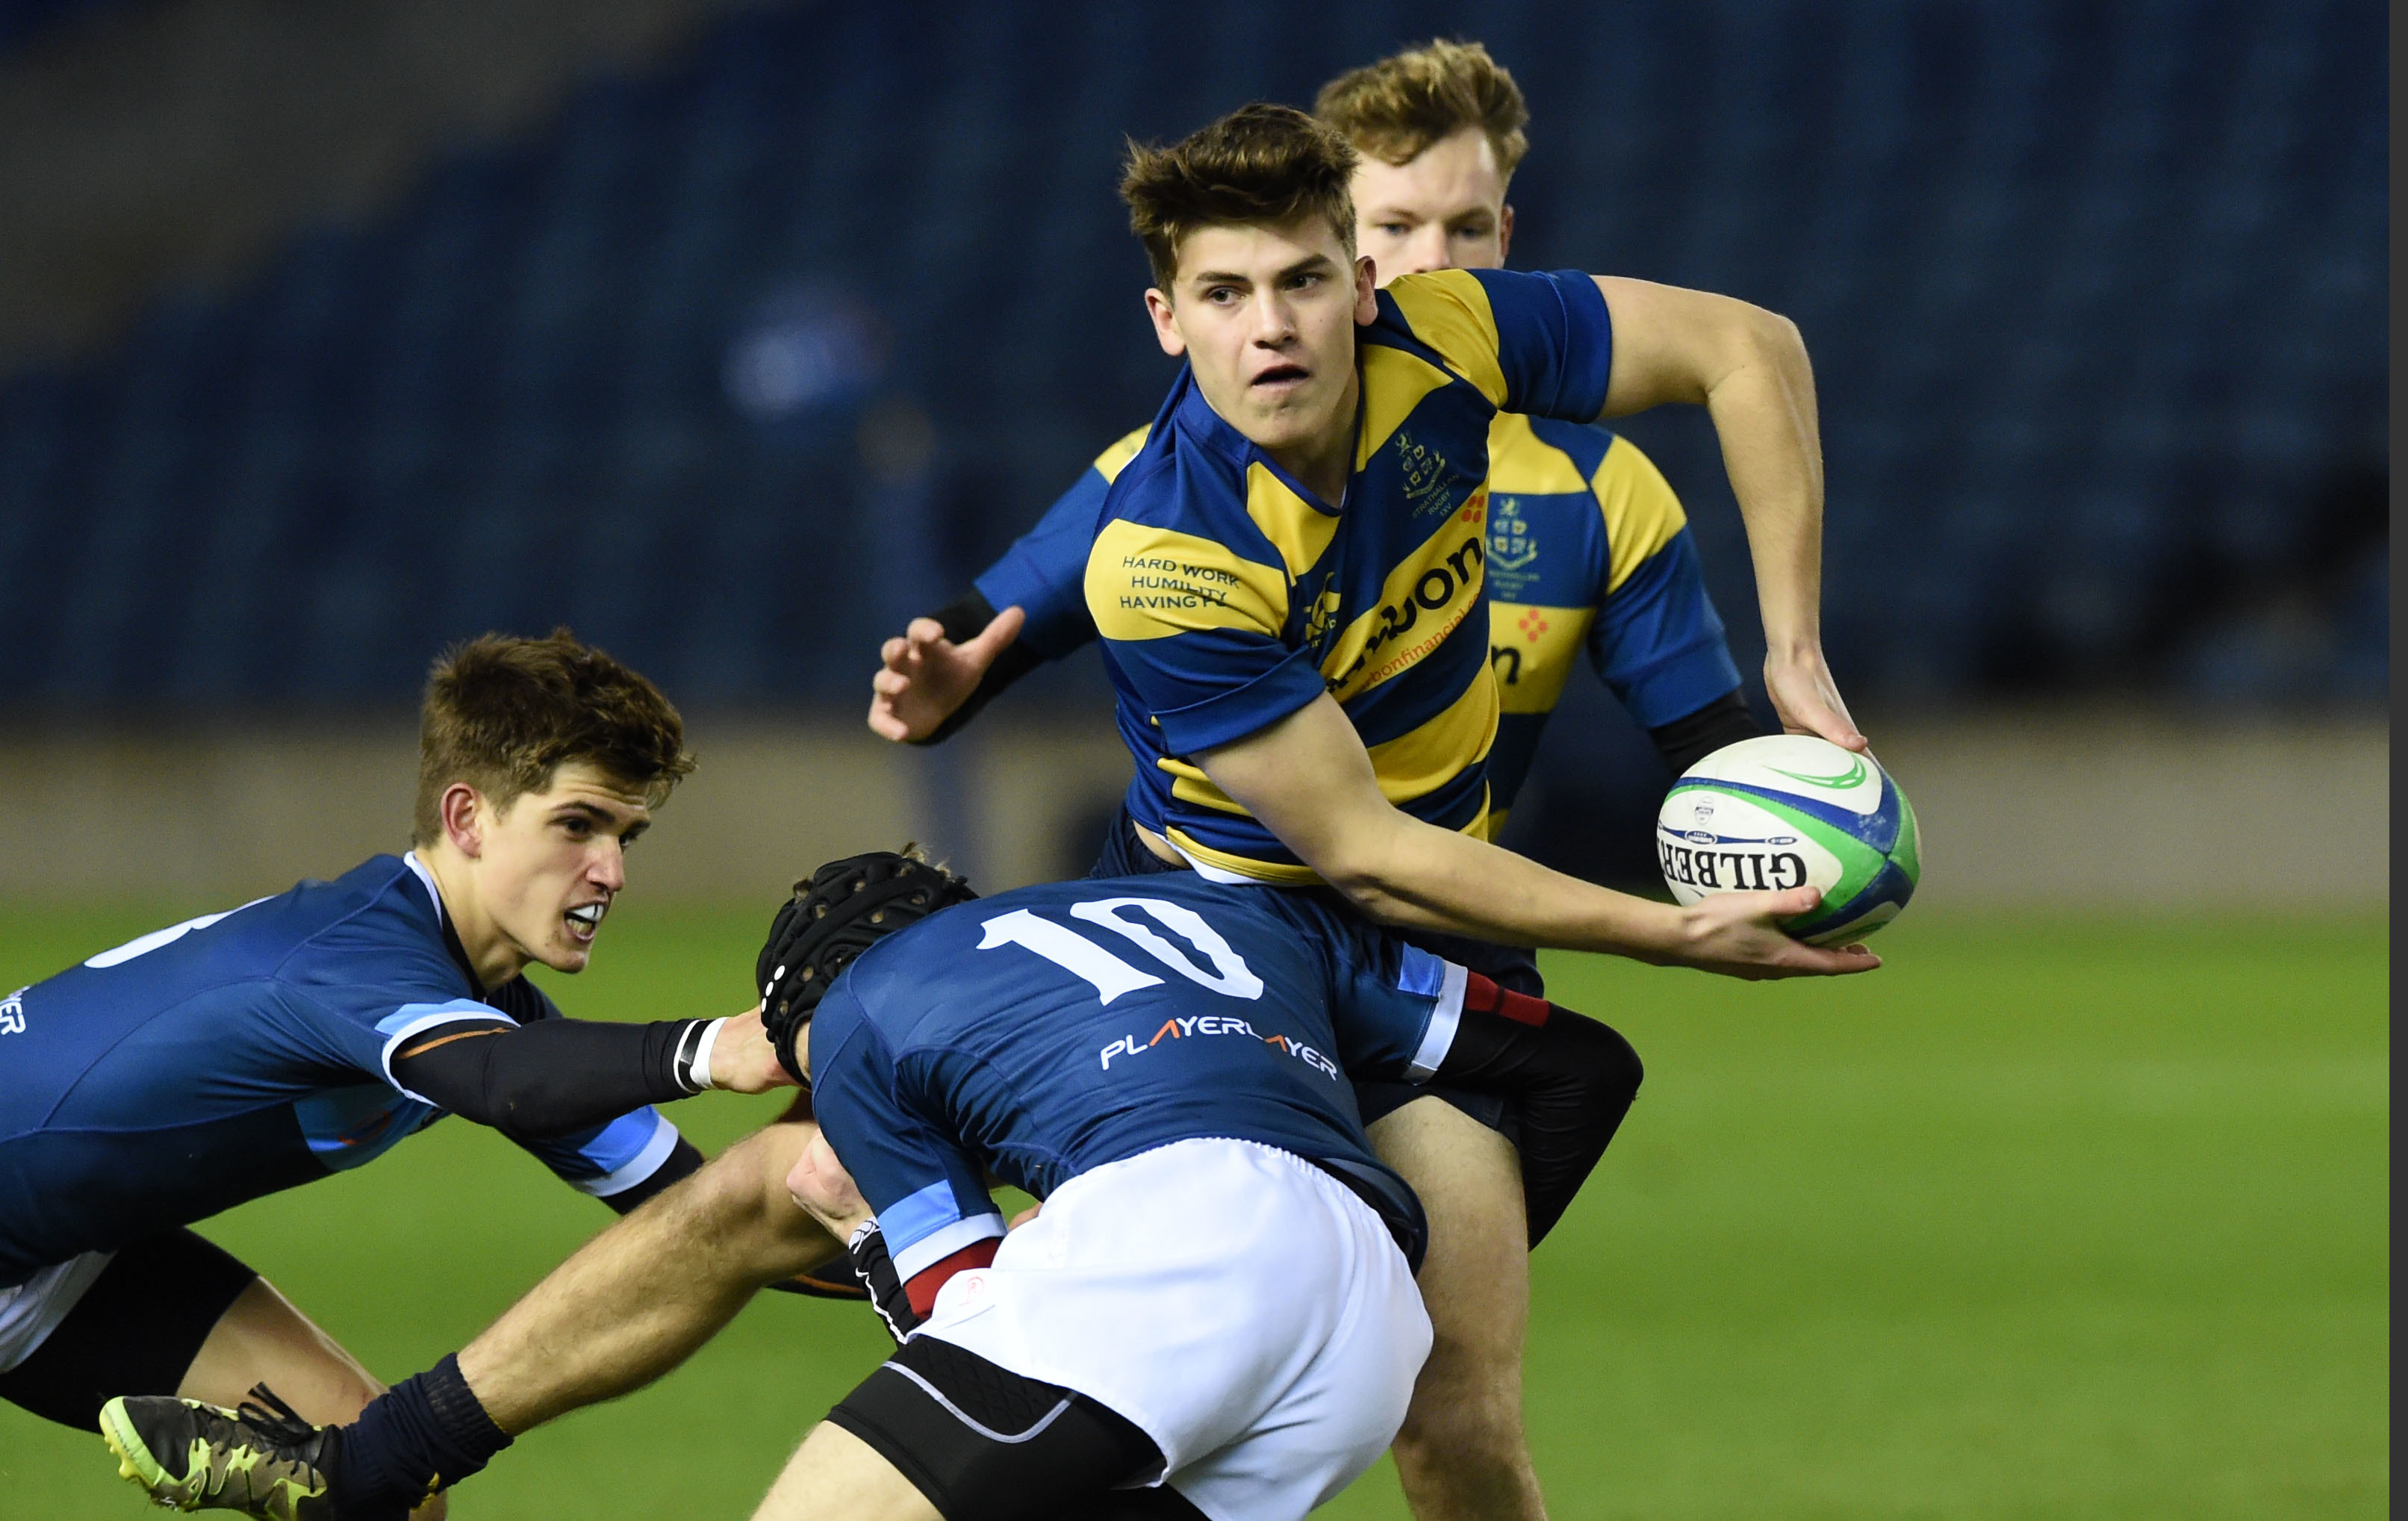 Man of the Match Angus Vipond of Strathallan is tackled by Glenalmond's Rafe Houston at Murrayfield.